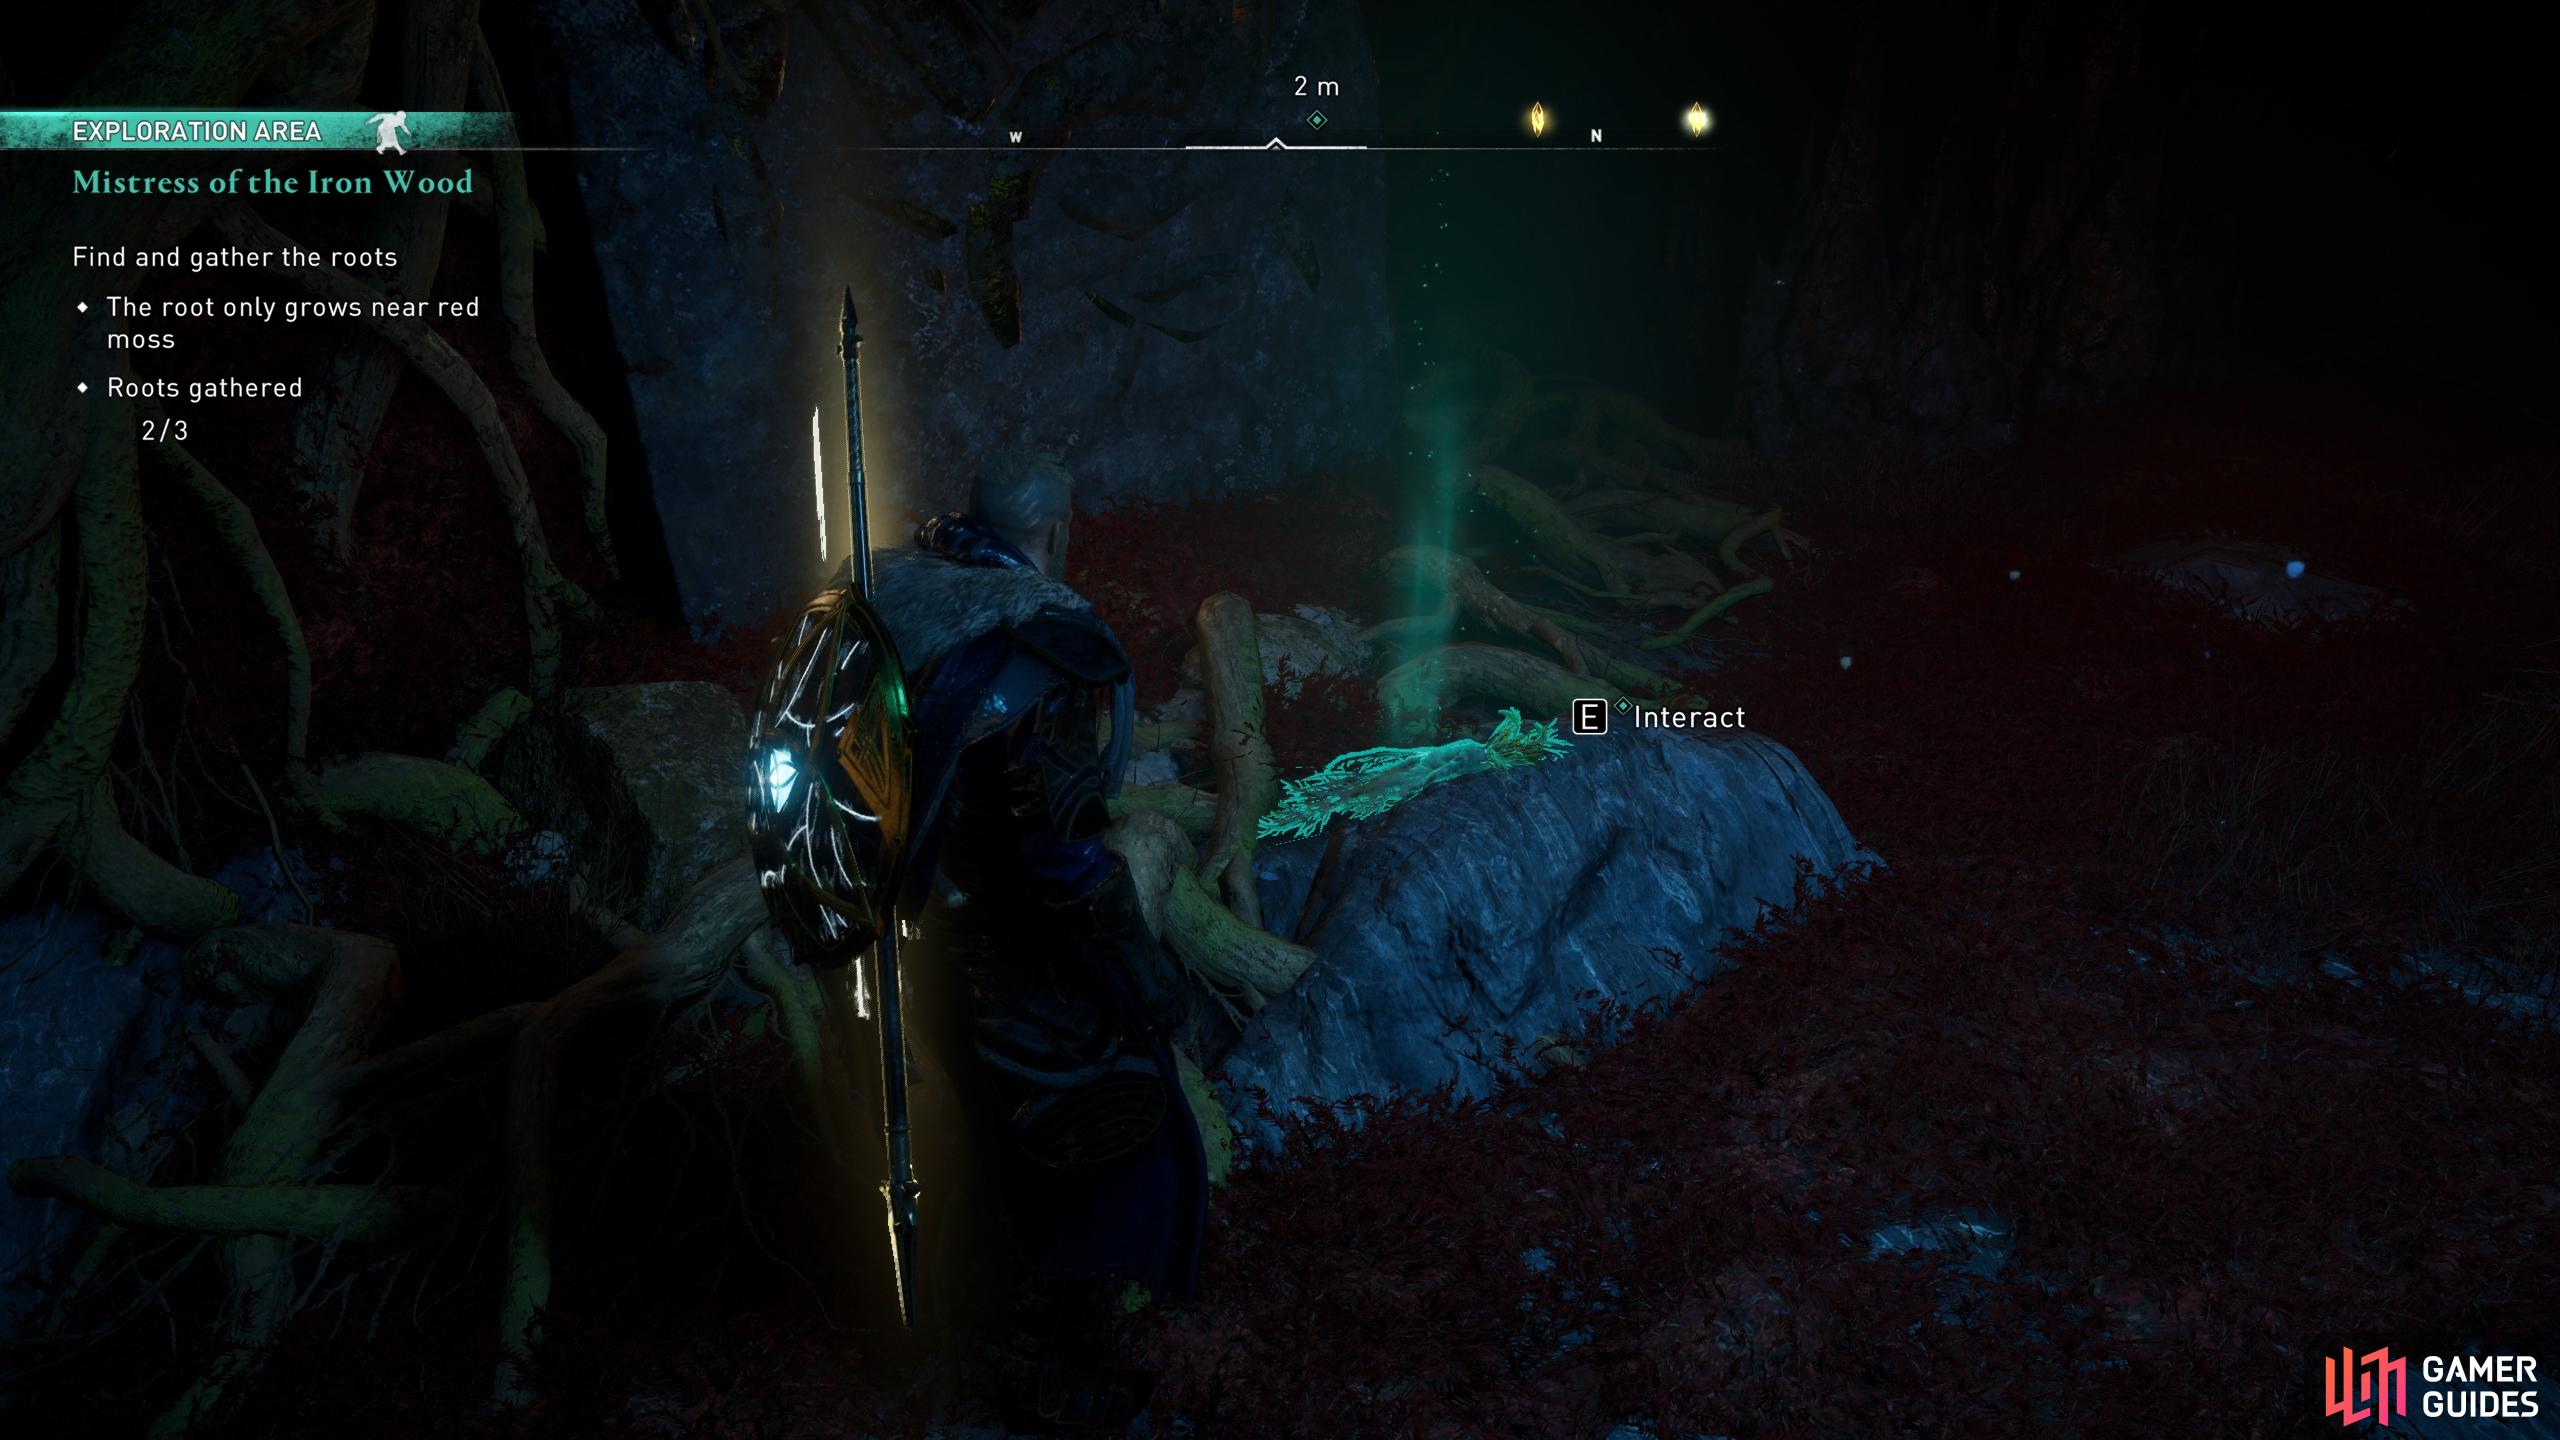 You can highlight the roots by using Odins Sight within the cave.